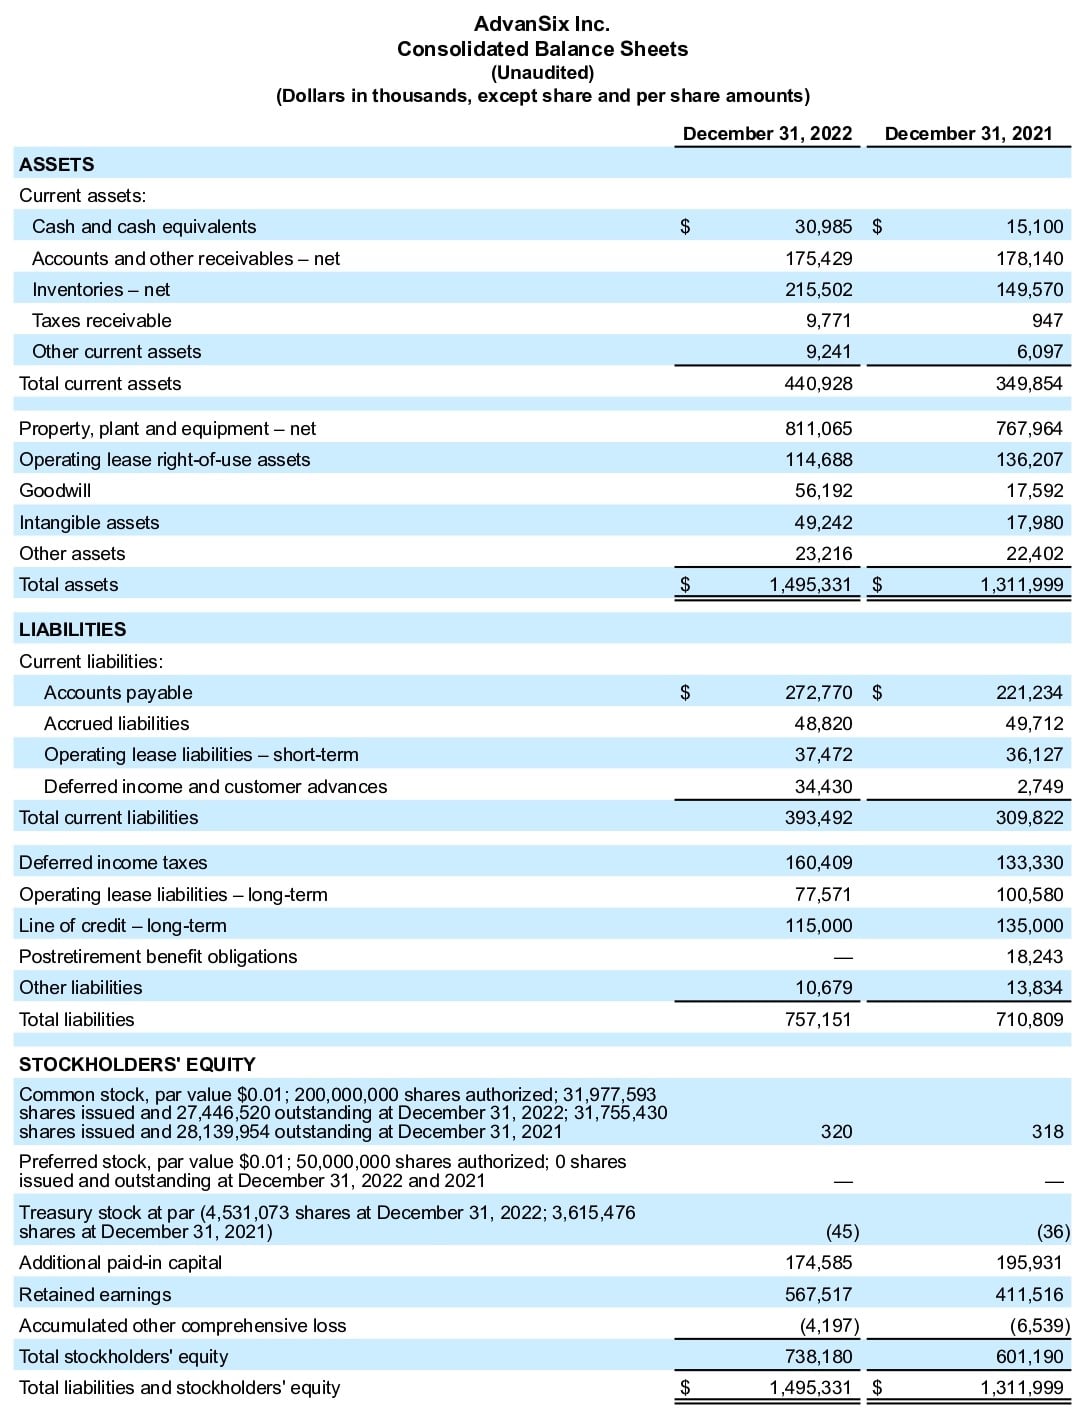 Table - AdvanSix Inc. Consolidated Balance Sheets Fourth Quarter And Full Year 2022 Financial Results (Unaudited)(Dollars in thousands, except share and per share amounts)